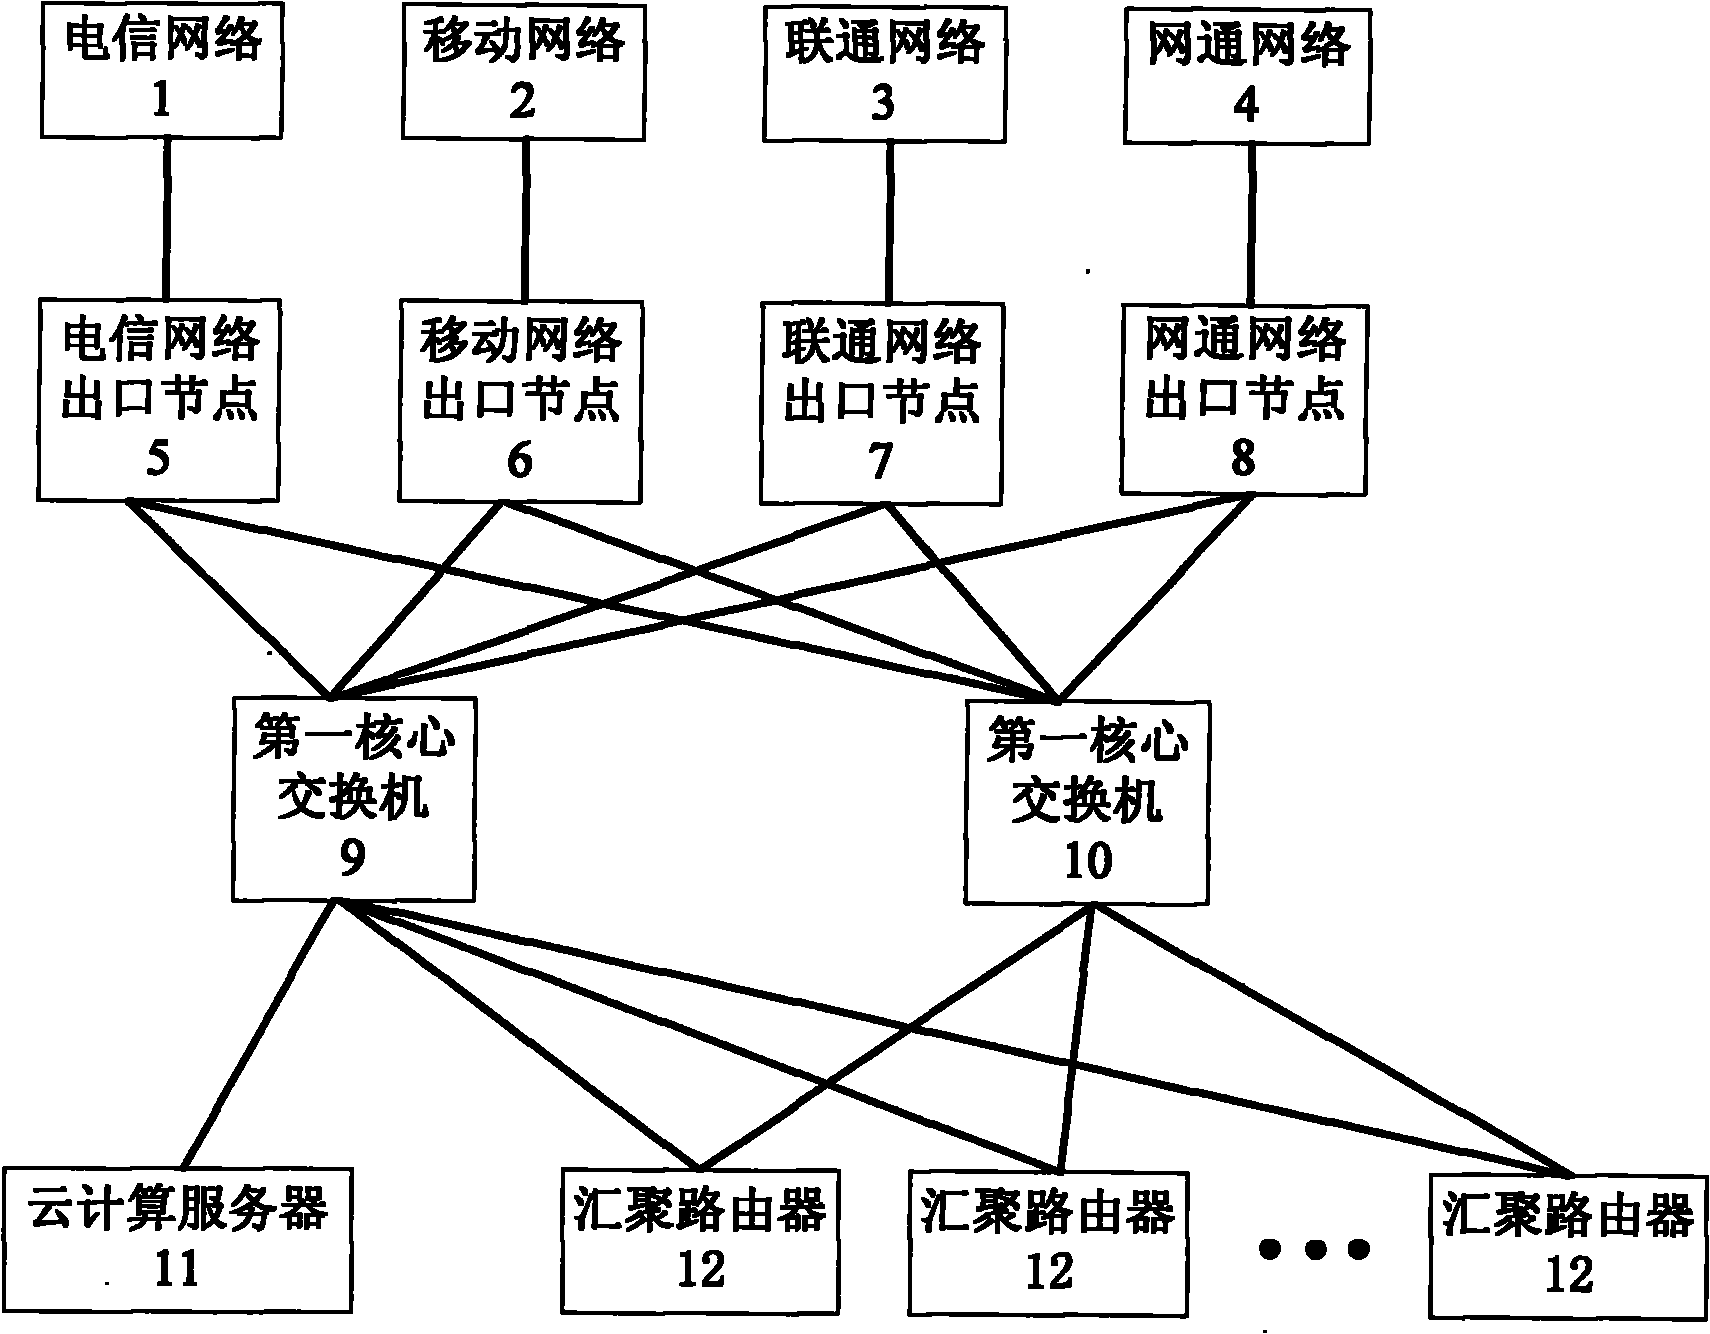 Four-network interconnection control system